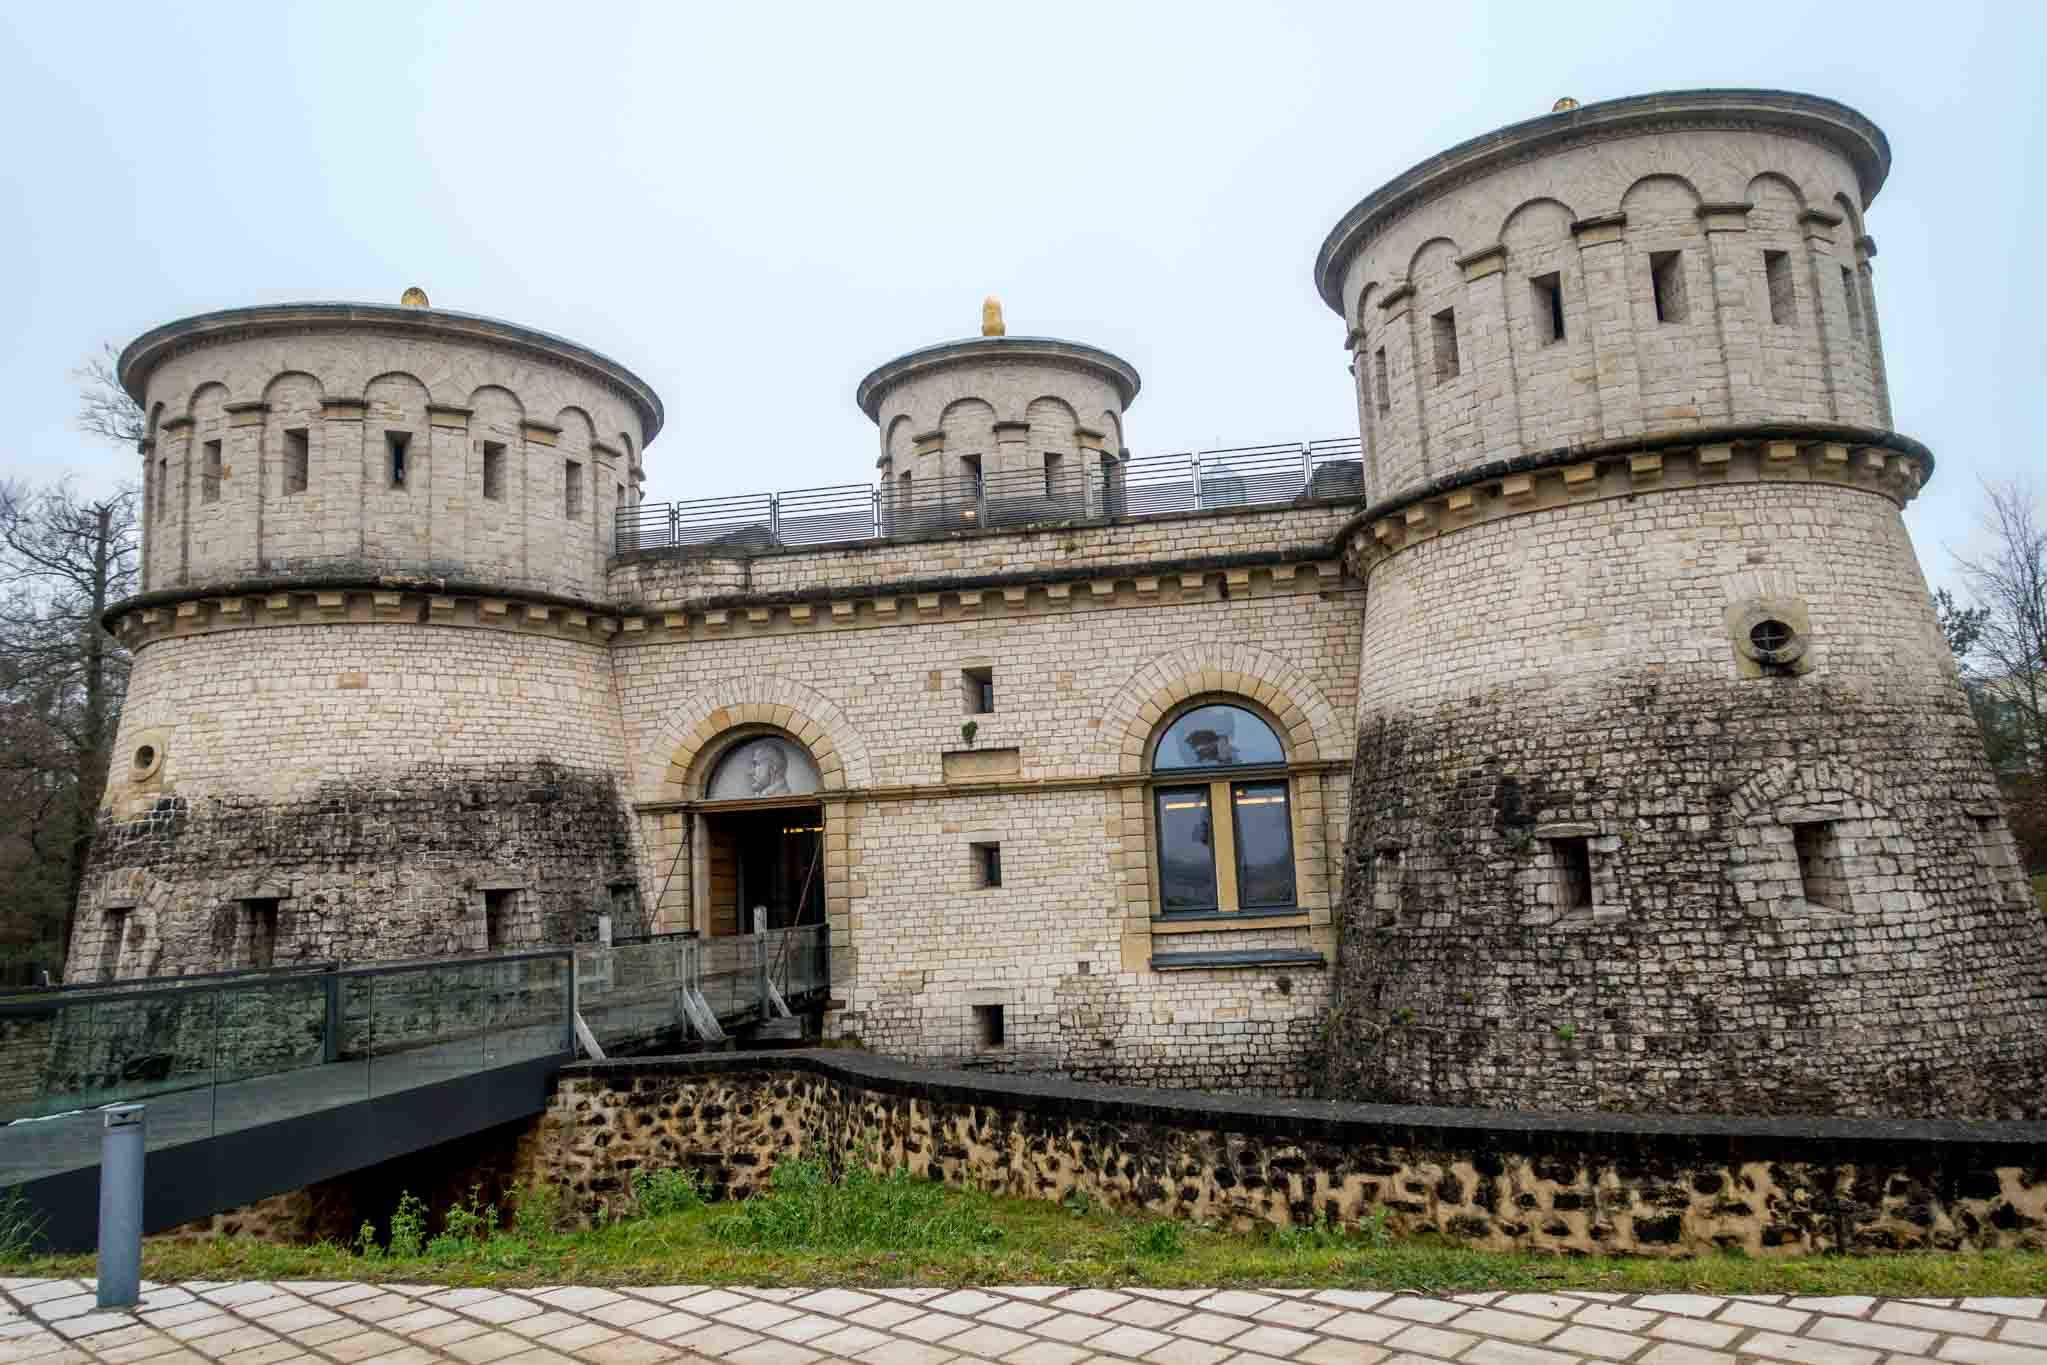 Fort with circular towers